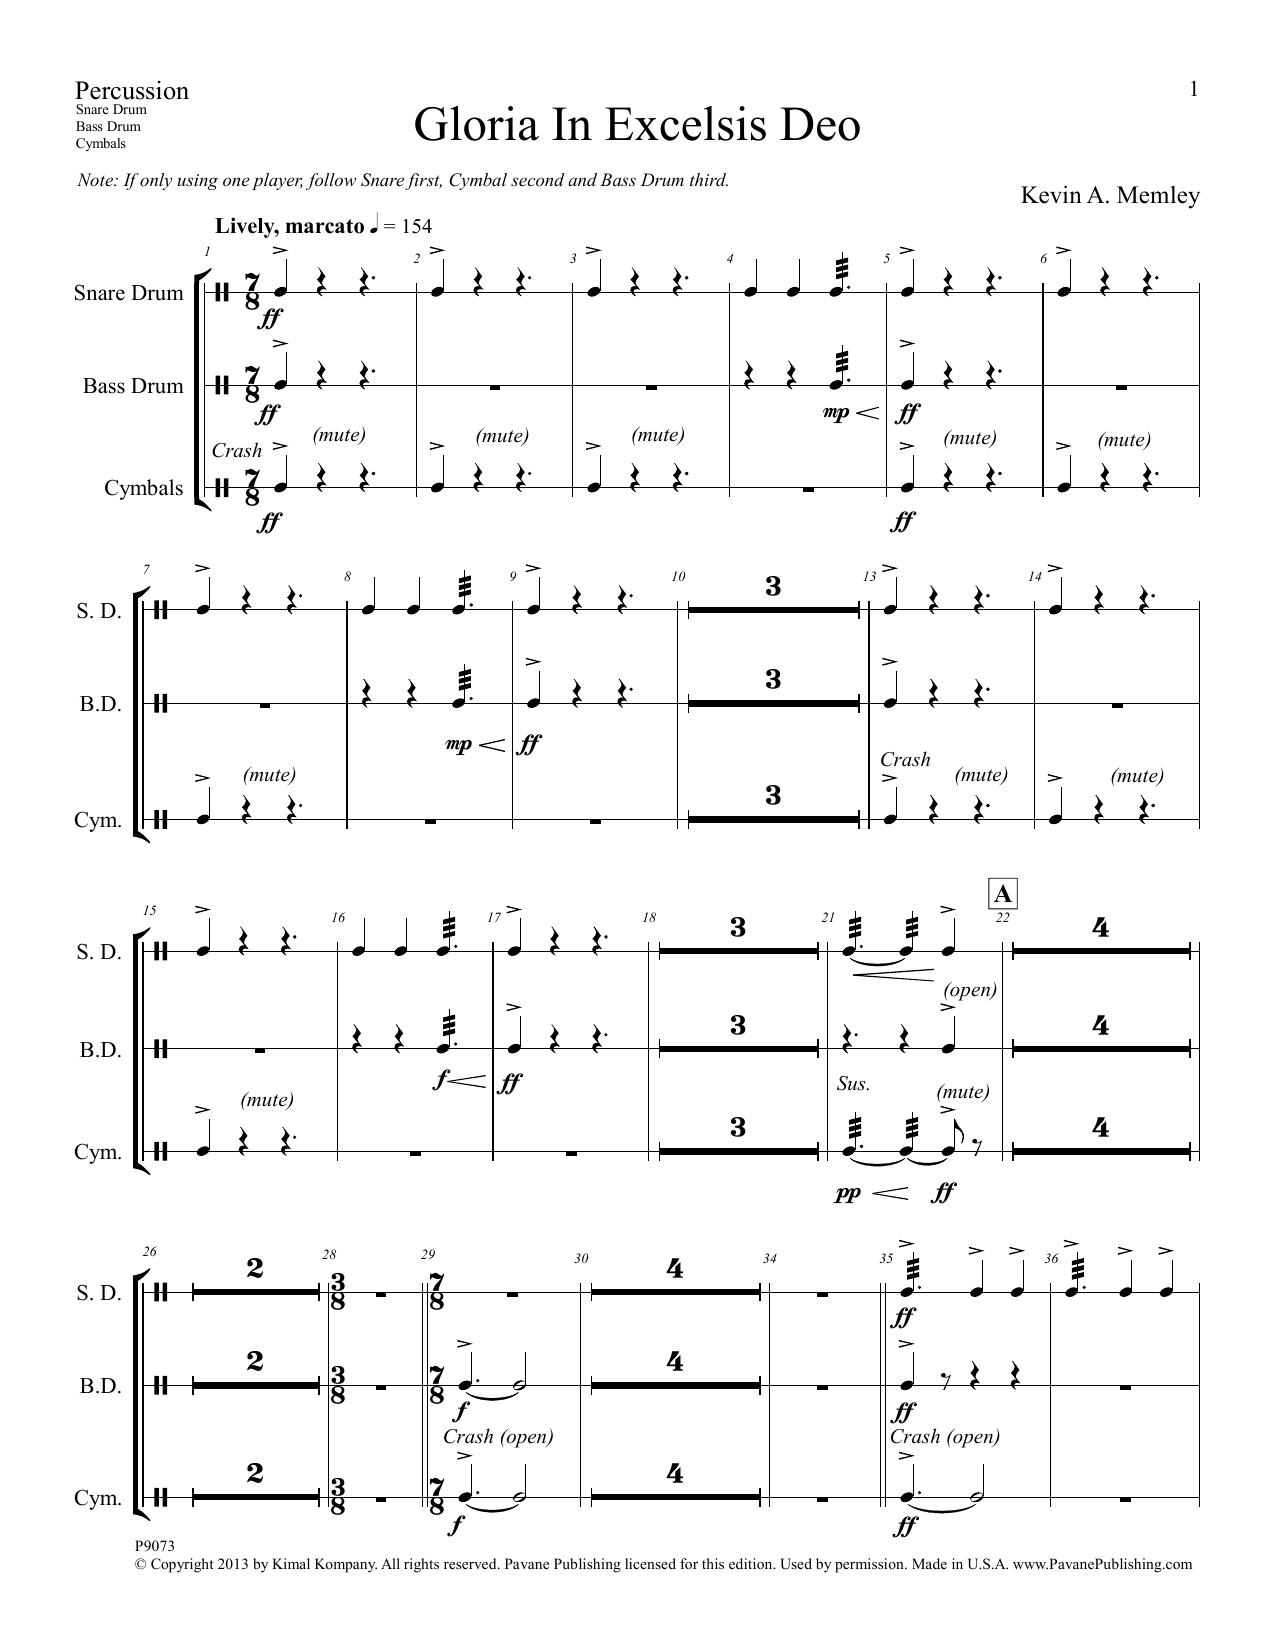 Download Kevin A. Memley Gloria in Excelsis Deo - Percussion Sheet Music